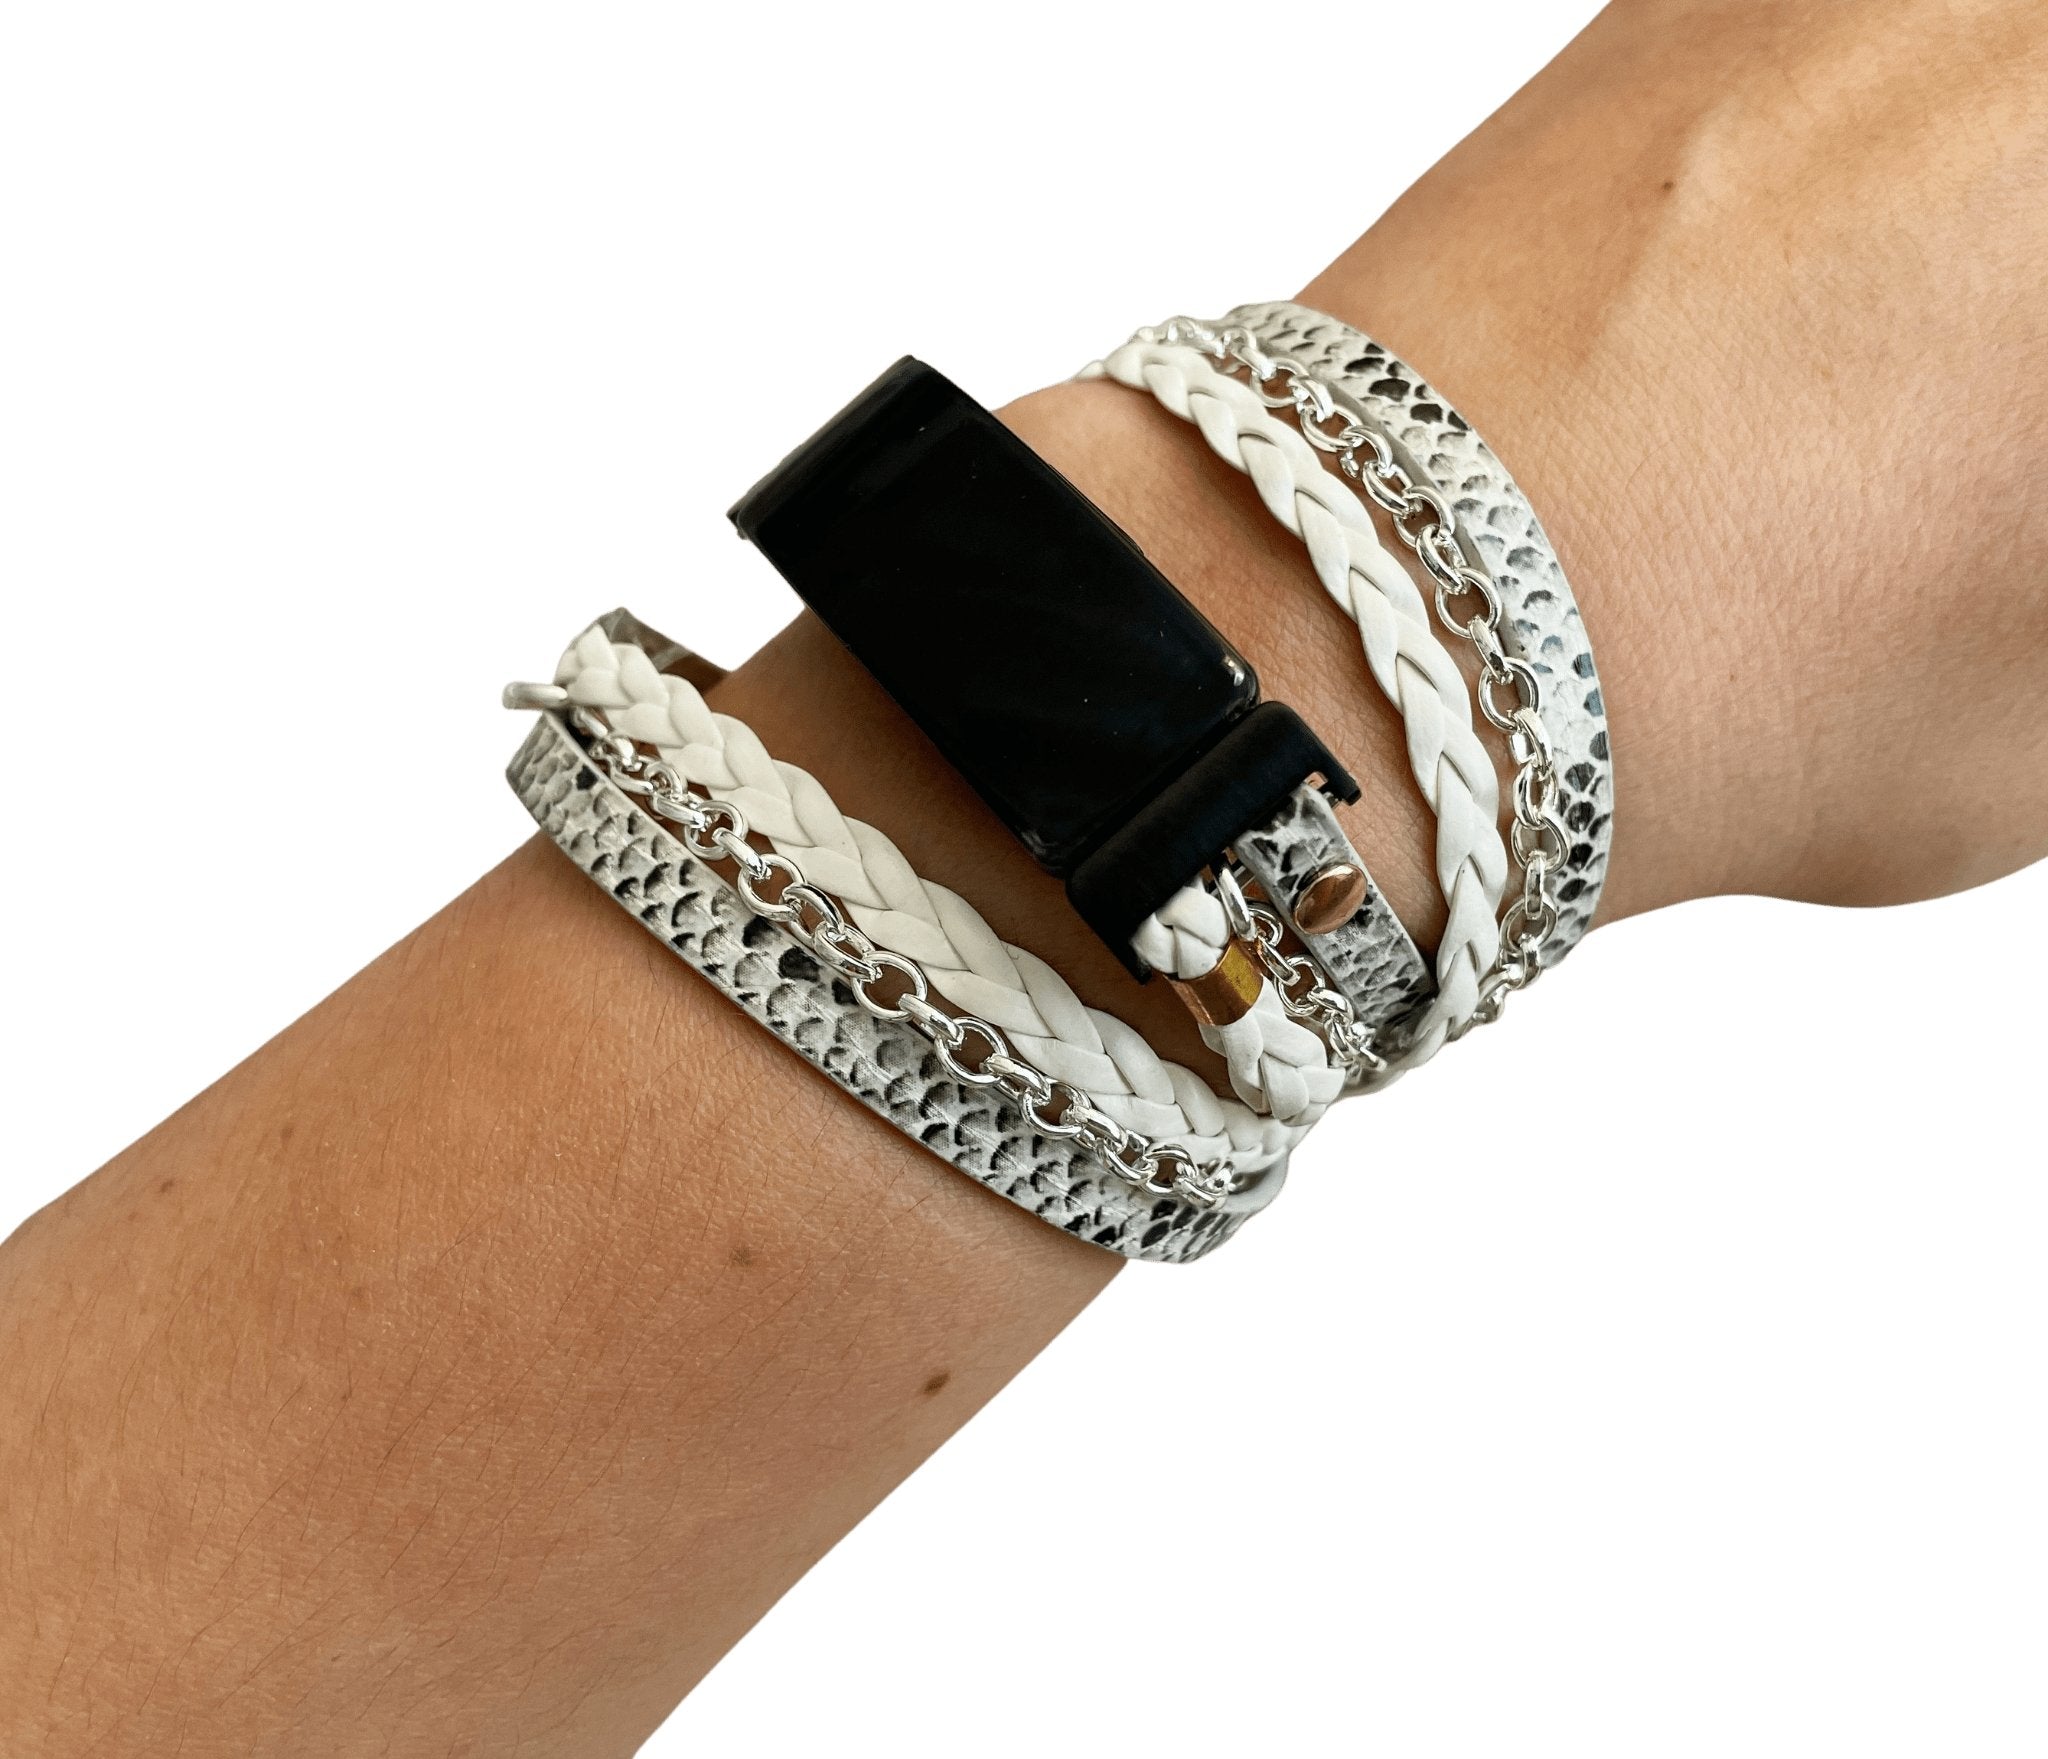 Boho Chic White Snakeskin LeatherWatch Band with Silver Chain for Fitbit  Luxe